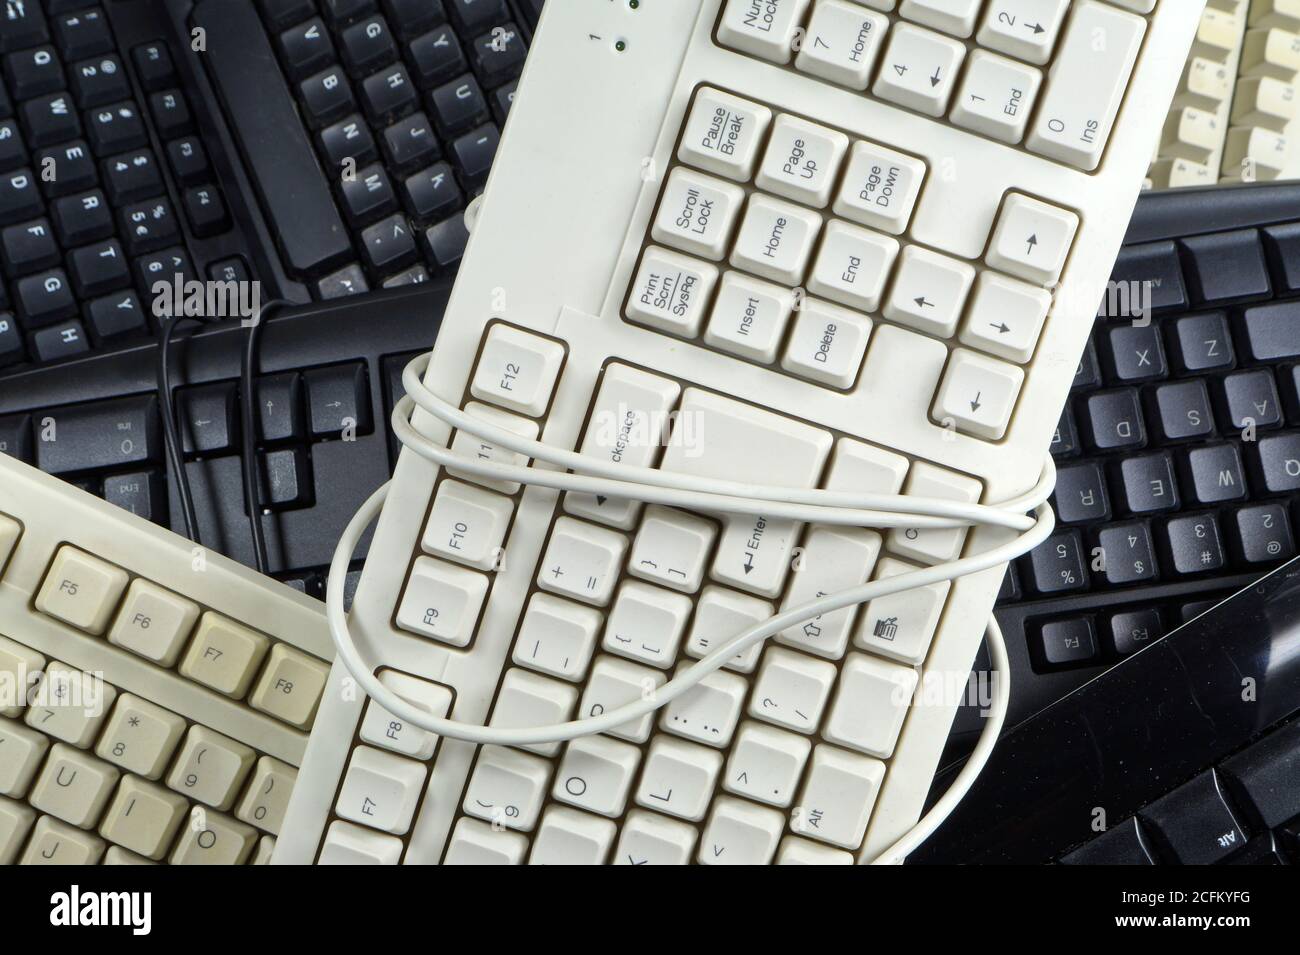 The problem of consumer electronics waste. Worn computer keyboards. Stock Photo